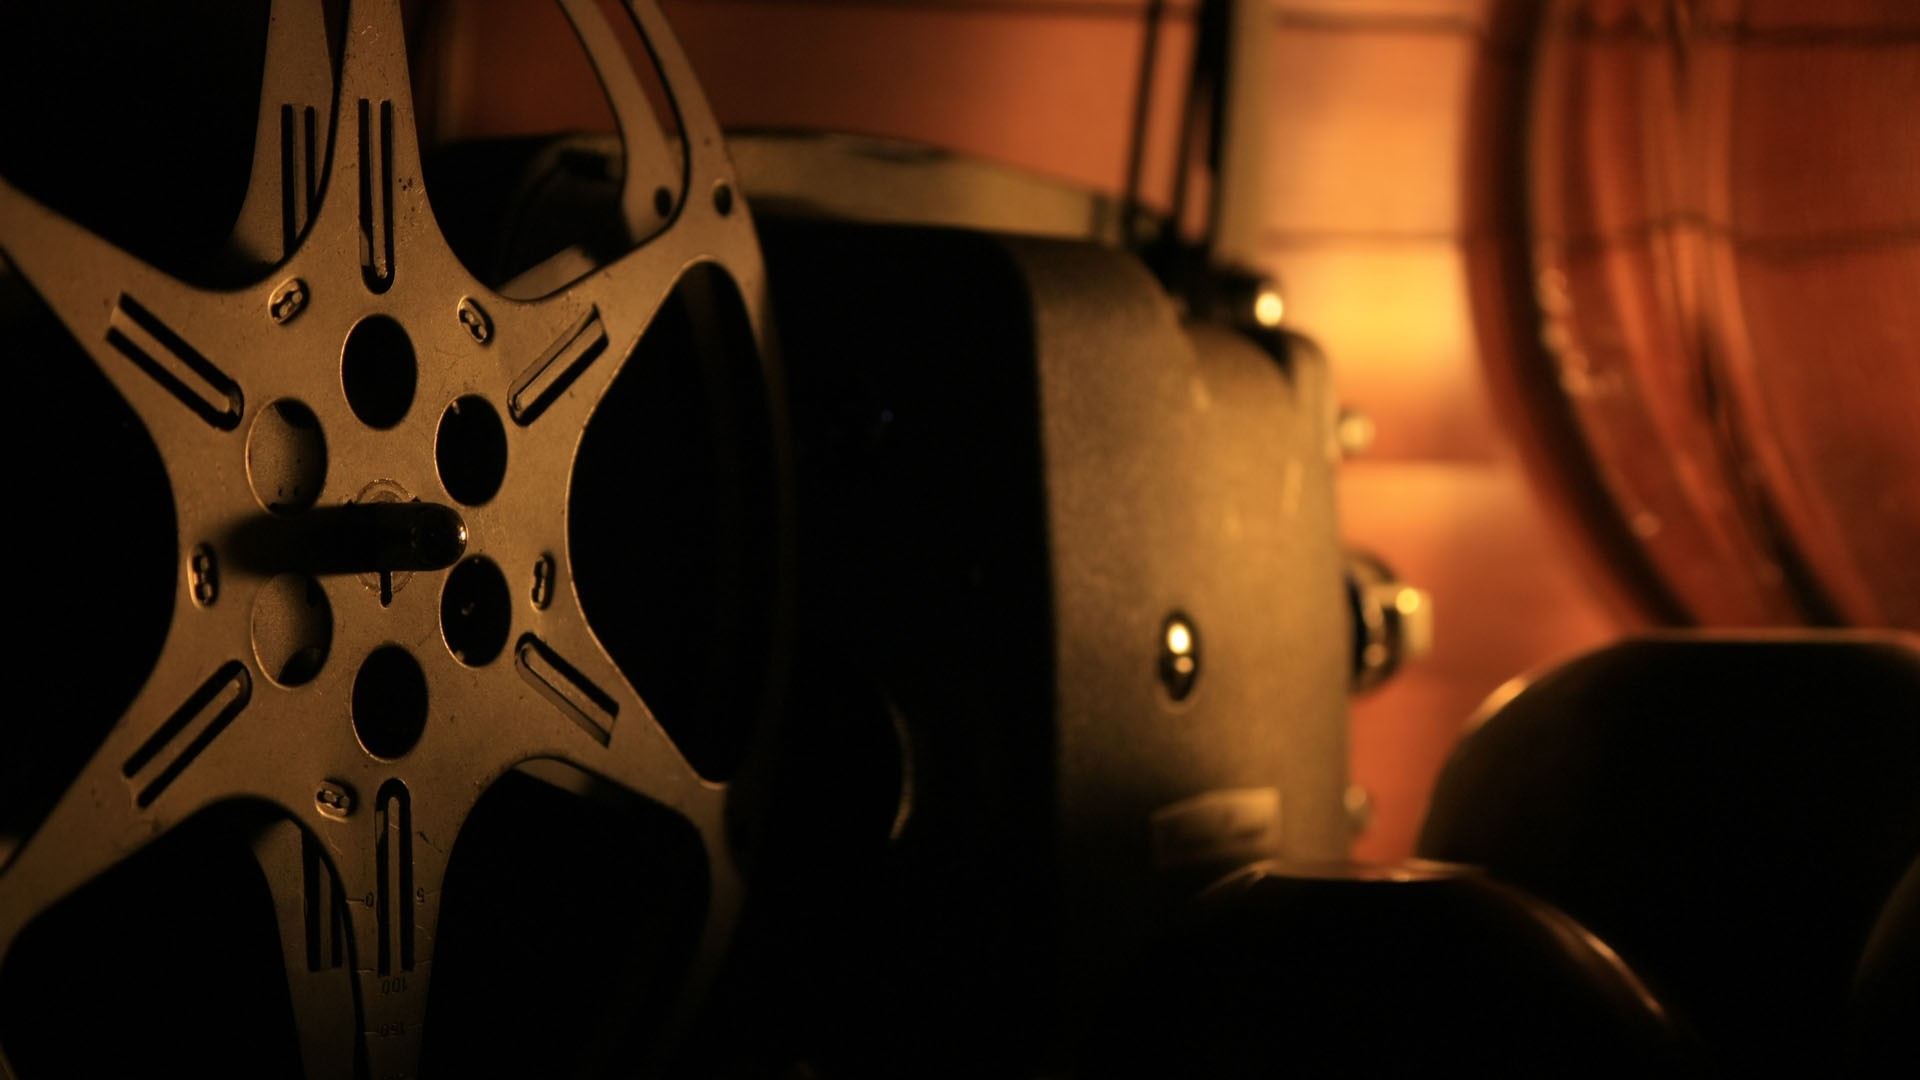 old film projector 1920x1080 wallpaper High Quality Wallpaper, High Definition Wallpaper